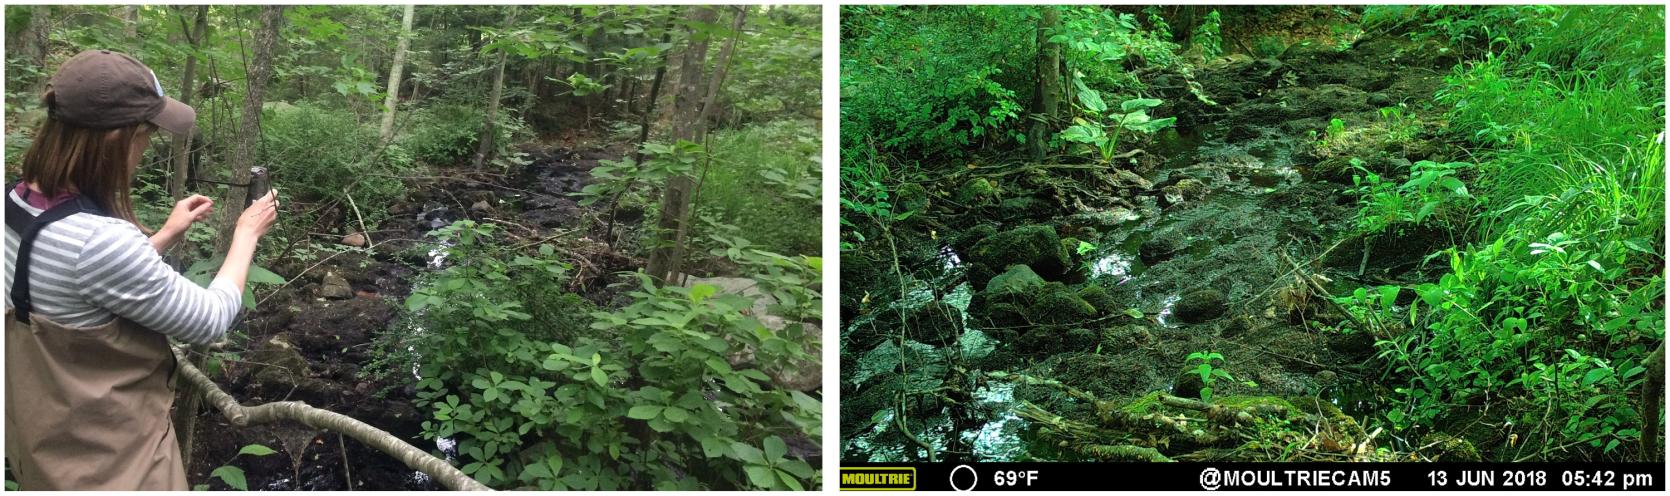 Two images one staff install timelapse devise, the second image capture on camera of site downstream 